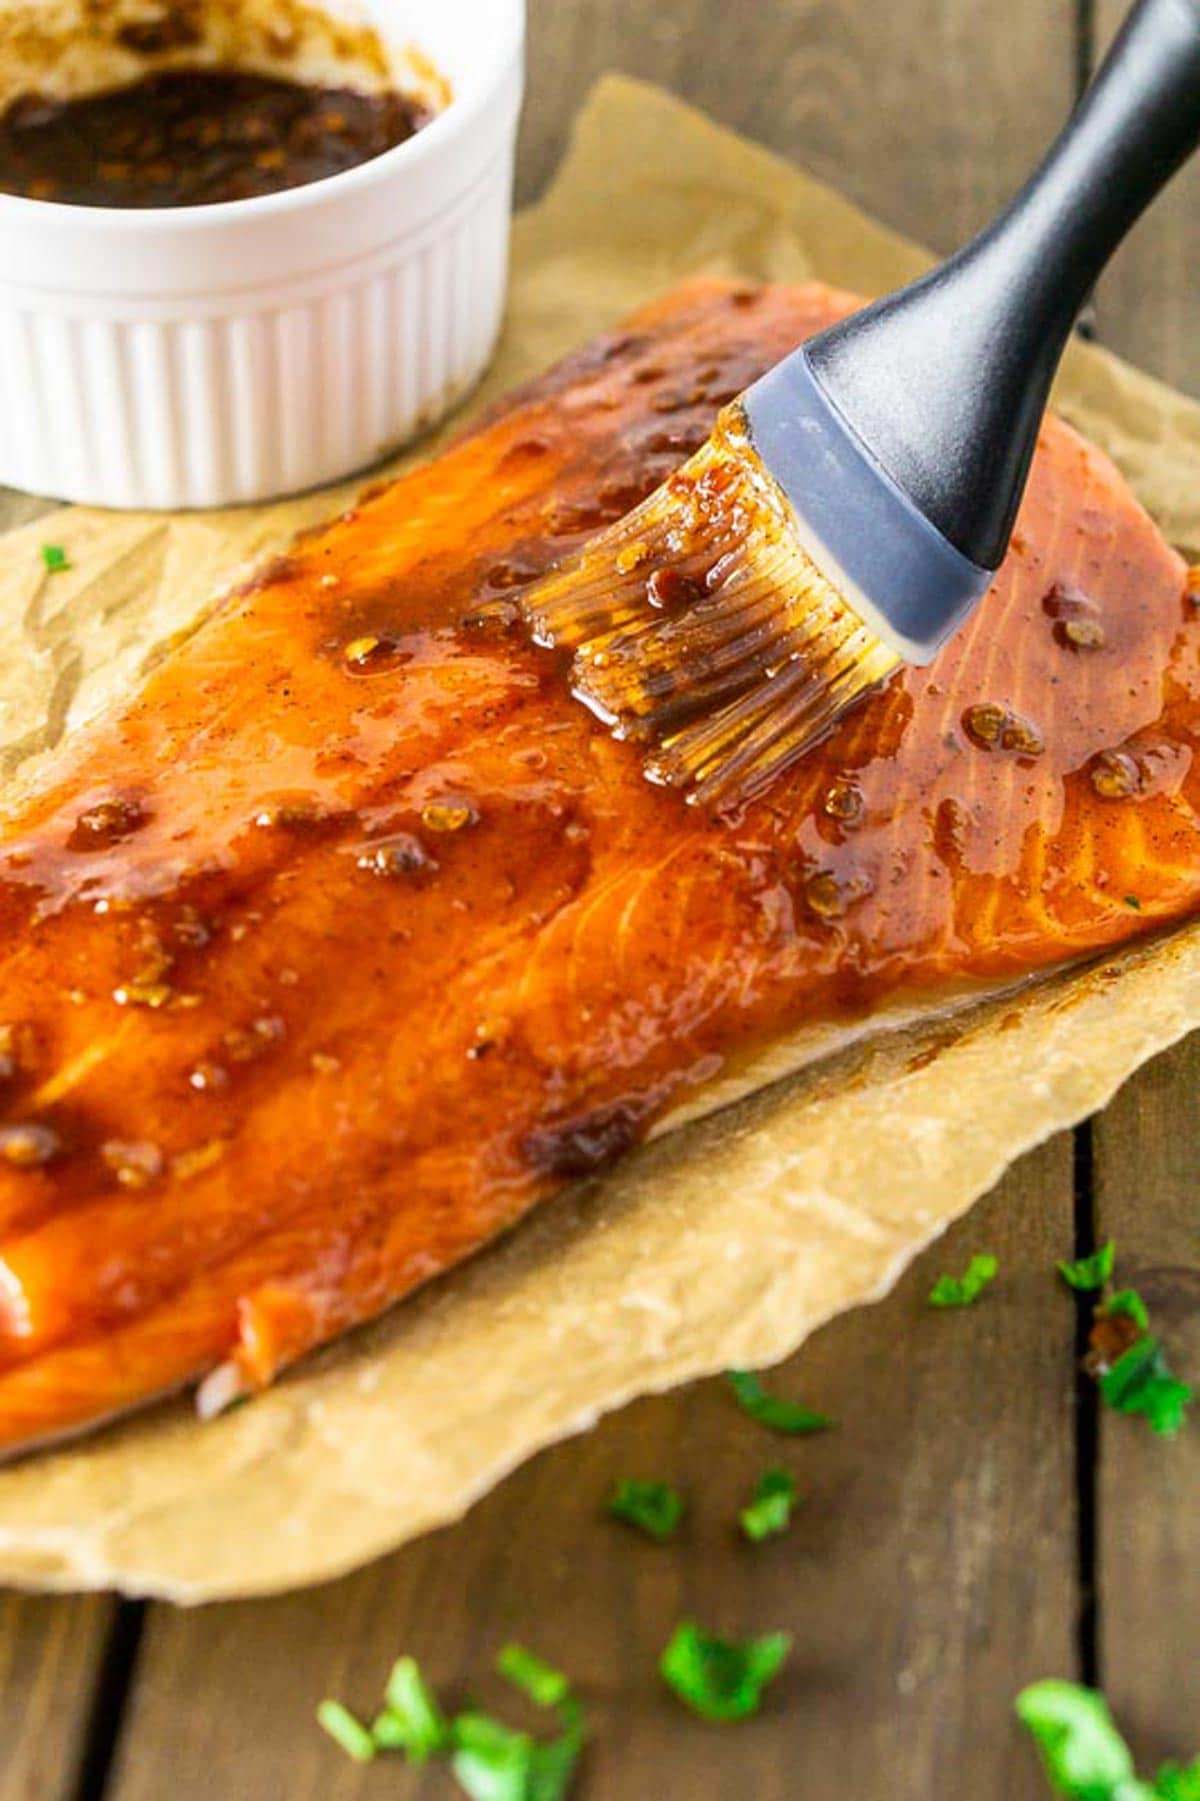 Brushing on the Maple Chipotle marinade onto a filet of Salmon.